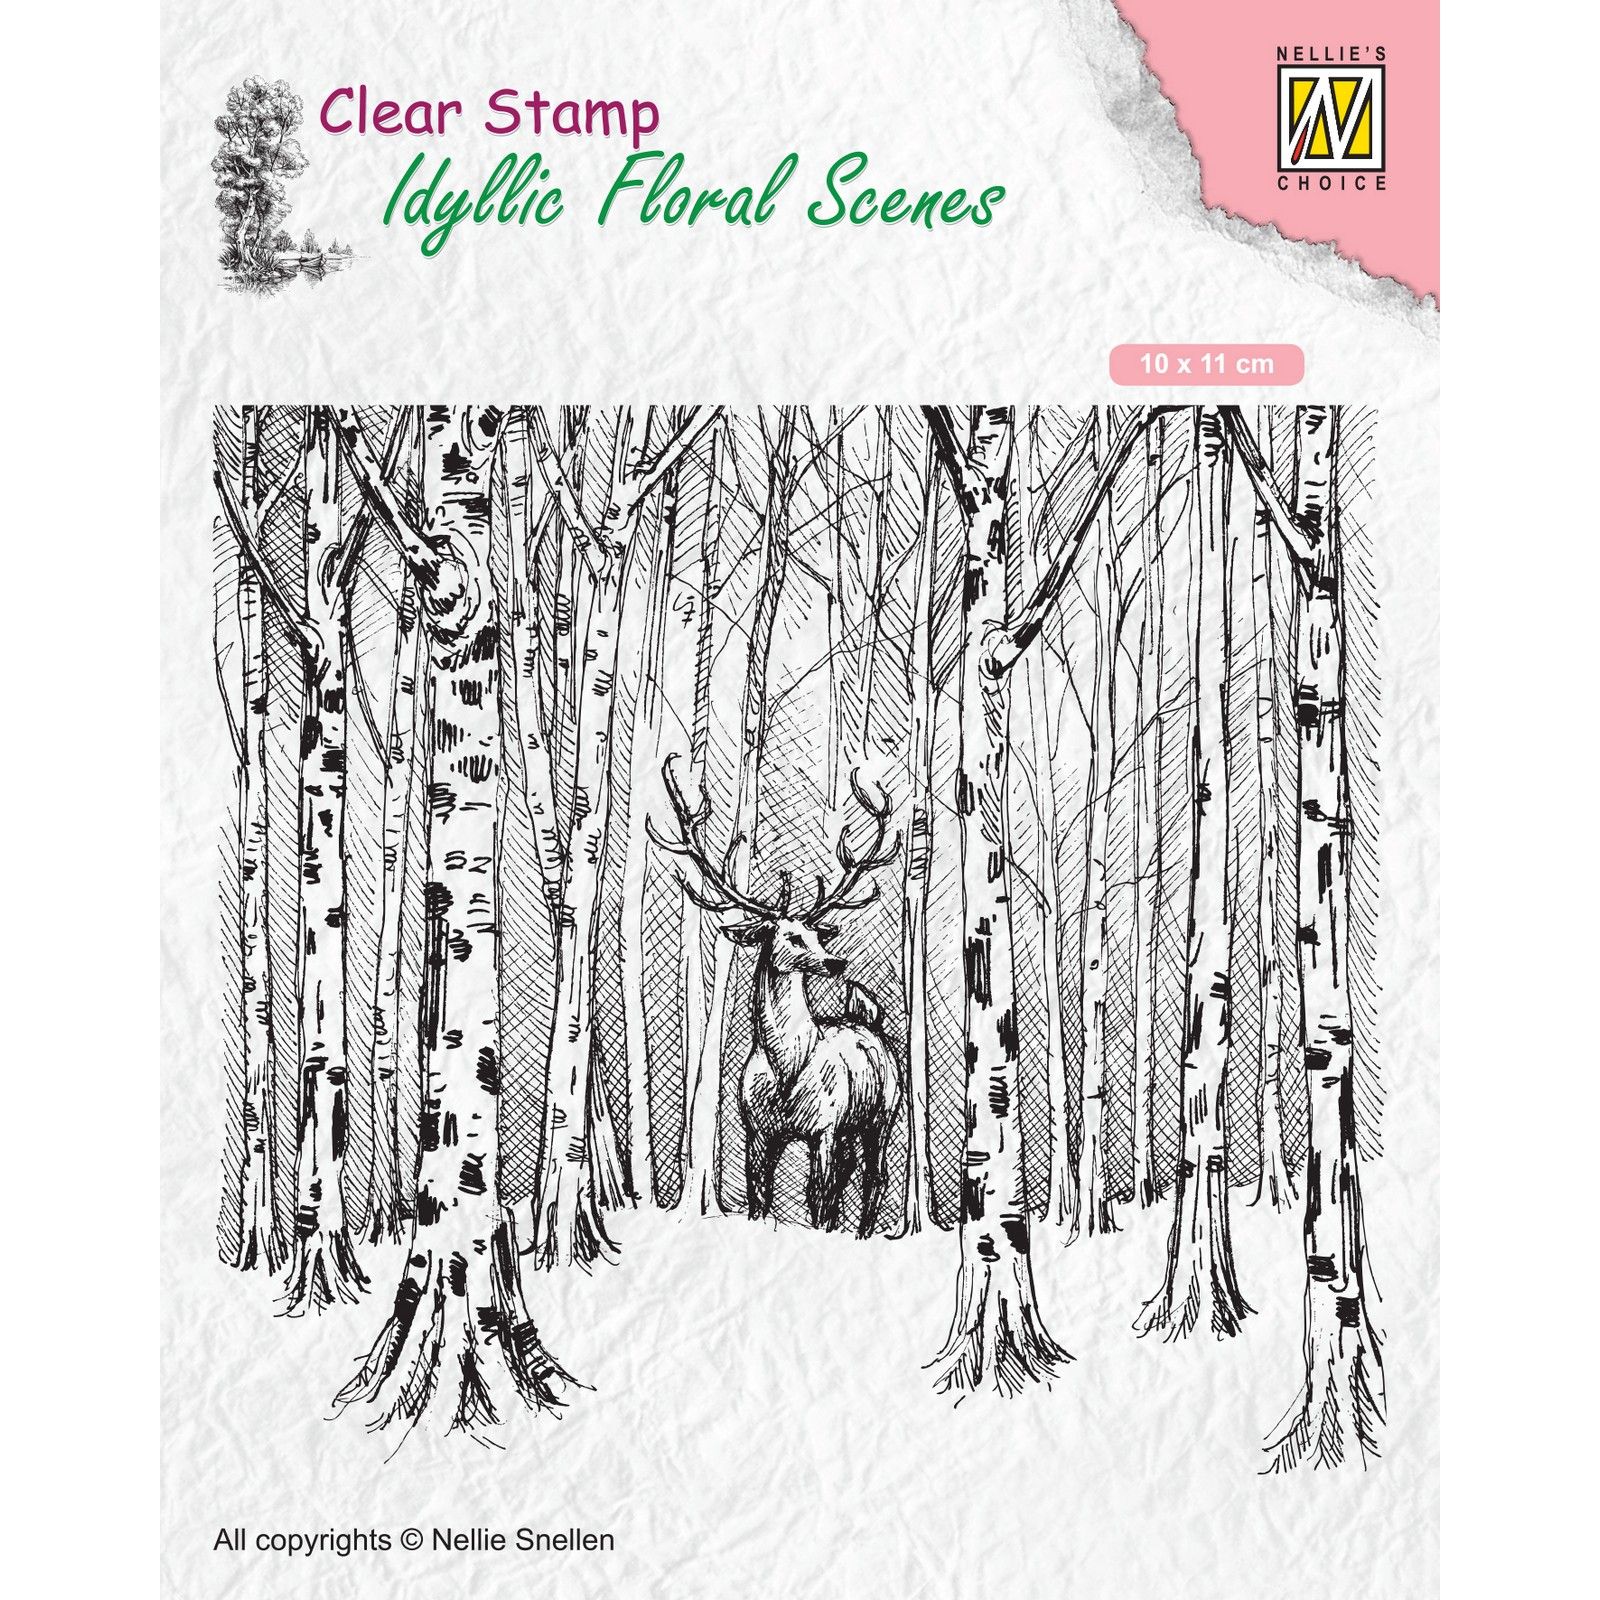 Nellie's Choice • Idyllic Floral Scenes Clear Stamps Deer in forrest 95x126mm